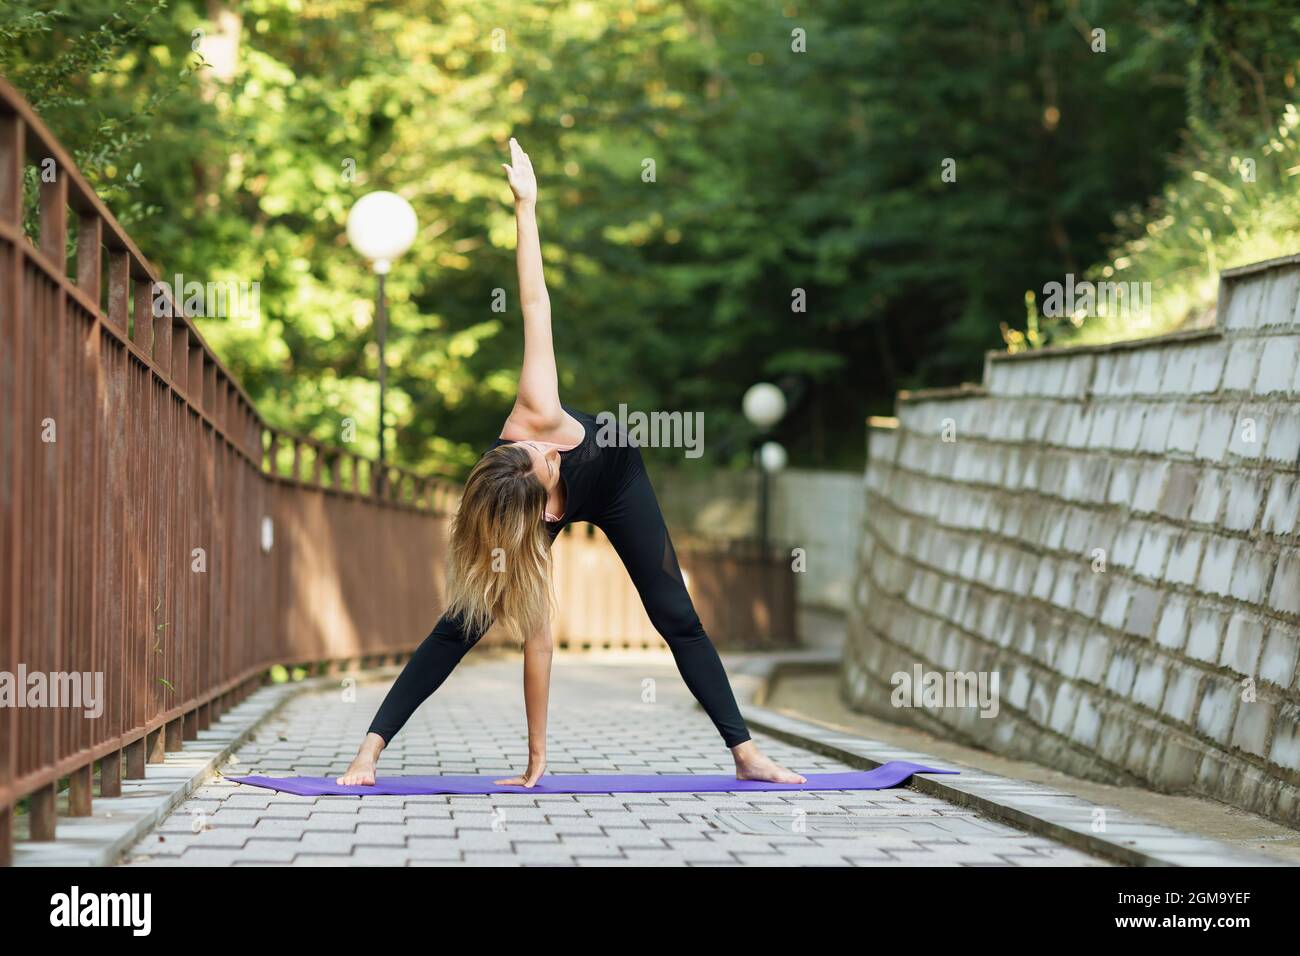 A woman practicing yoga, doing a twisting exercise Parivritta Padottanasana, exercising on a summer morning in the park, standing on a mat Stock Photo